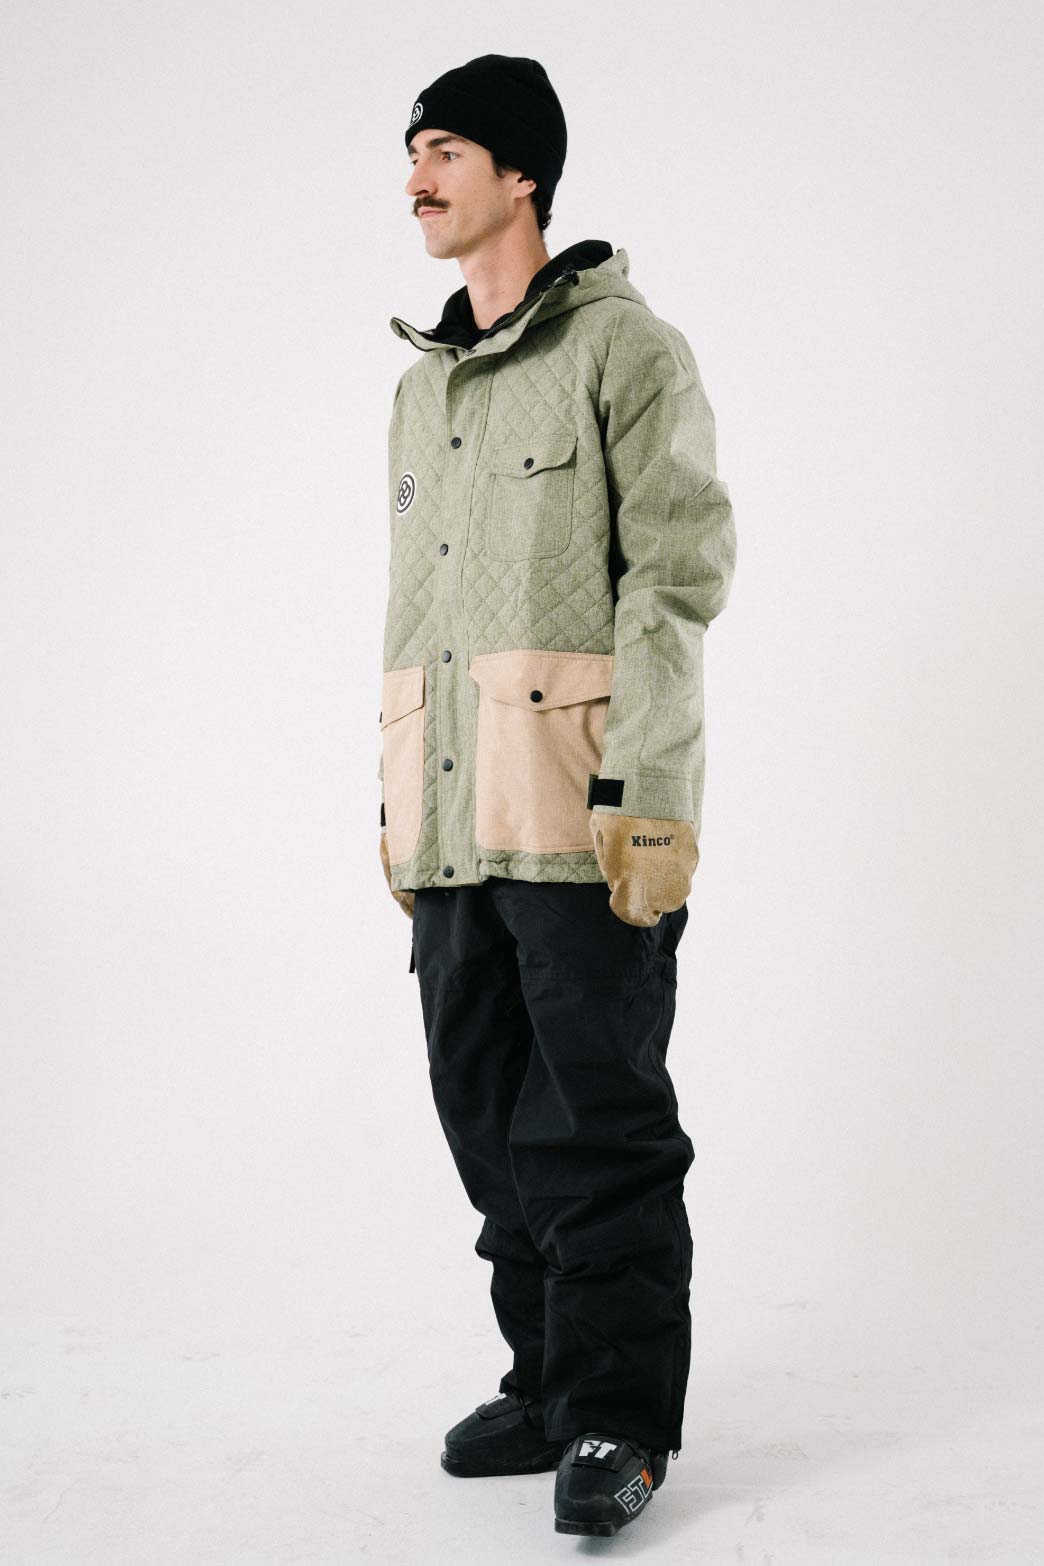 Cool Ski Outfits By Bloom Outerwear